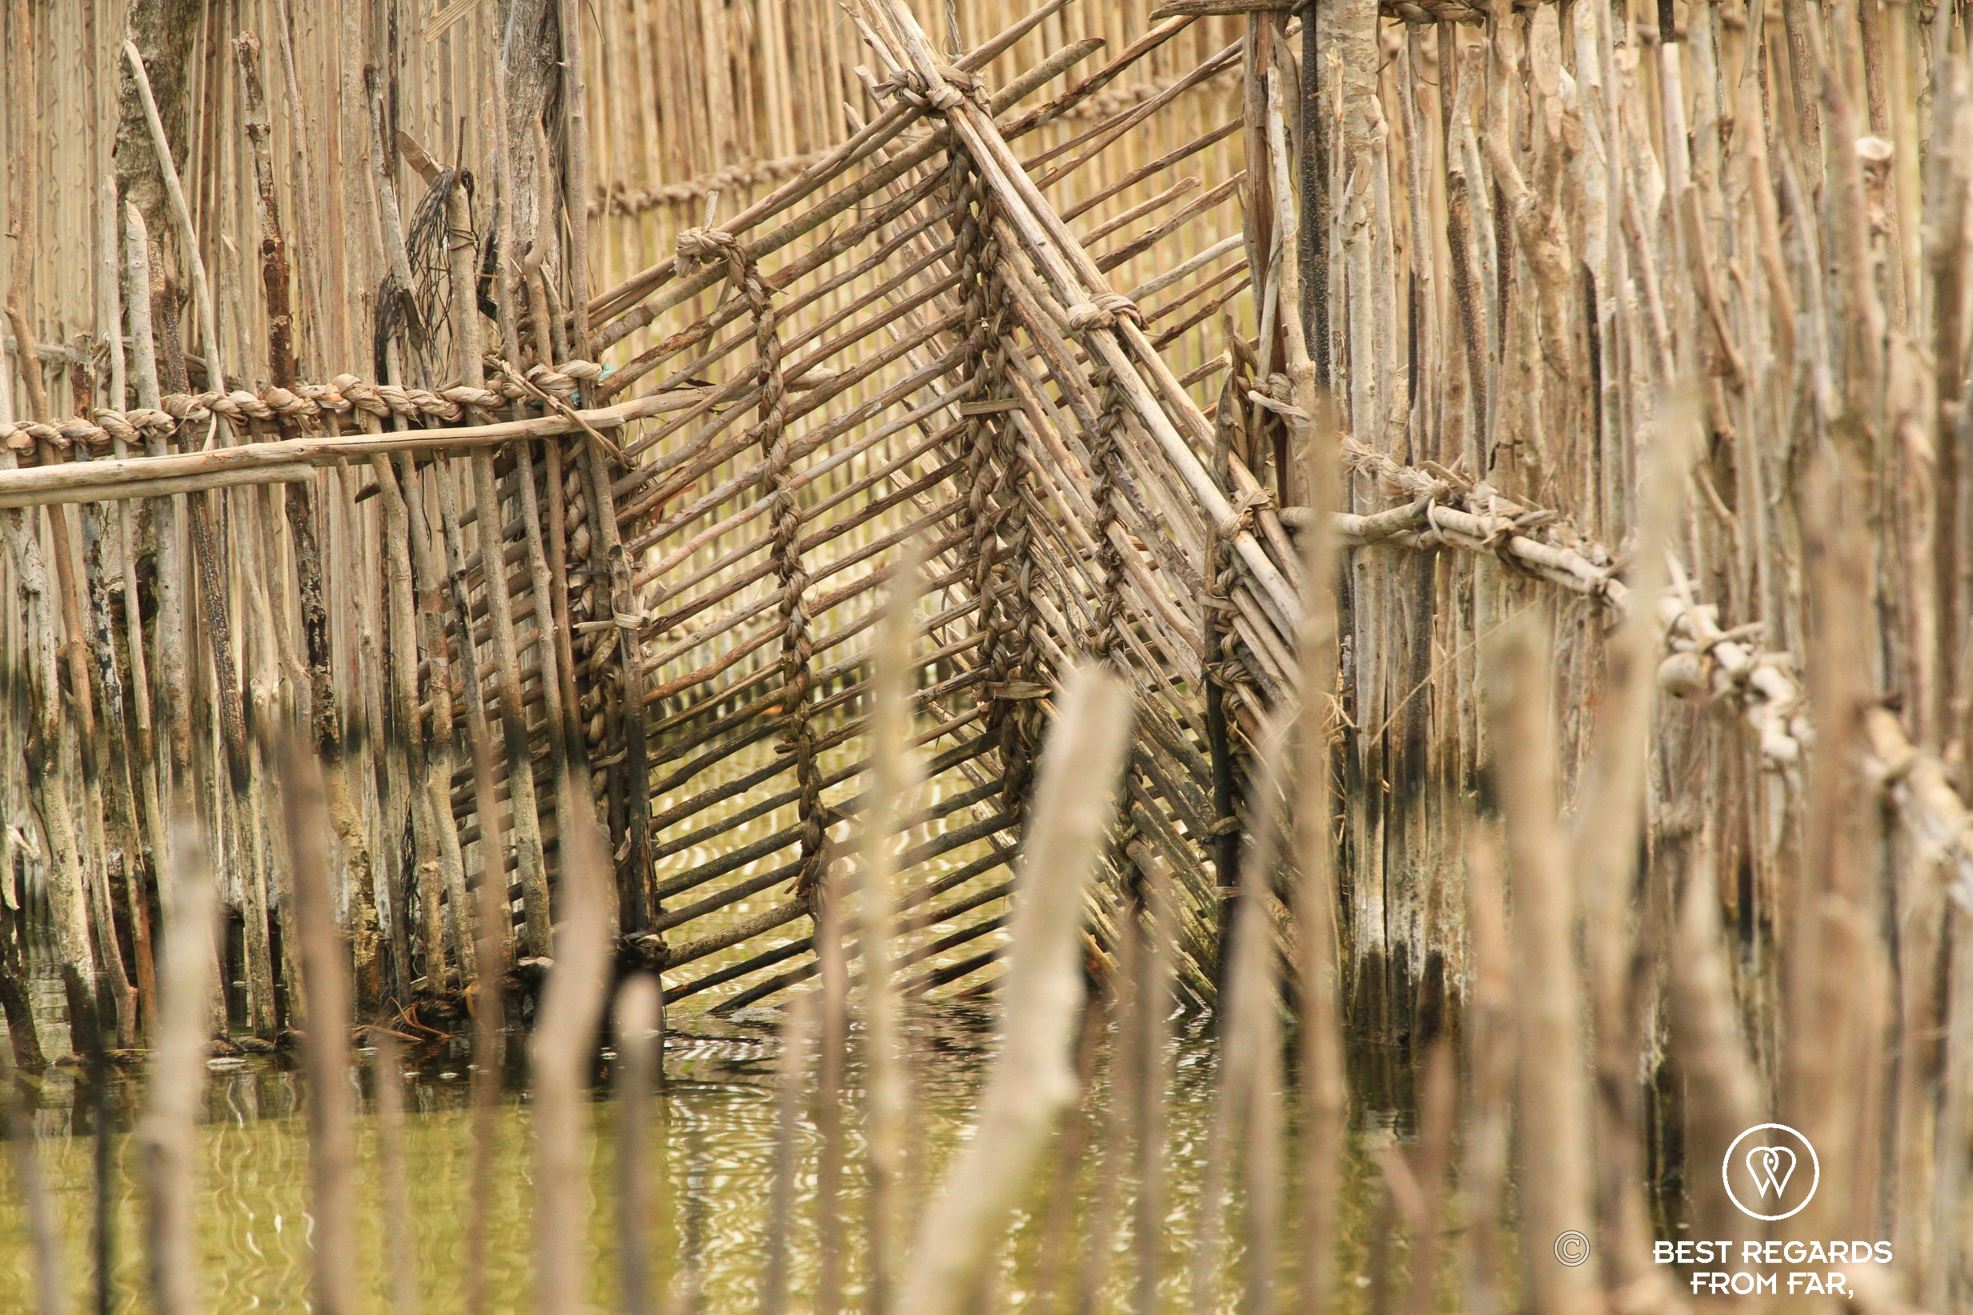 The hardwood gate of a fish trap in Kosi Bay, South Africa